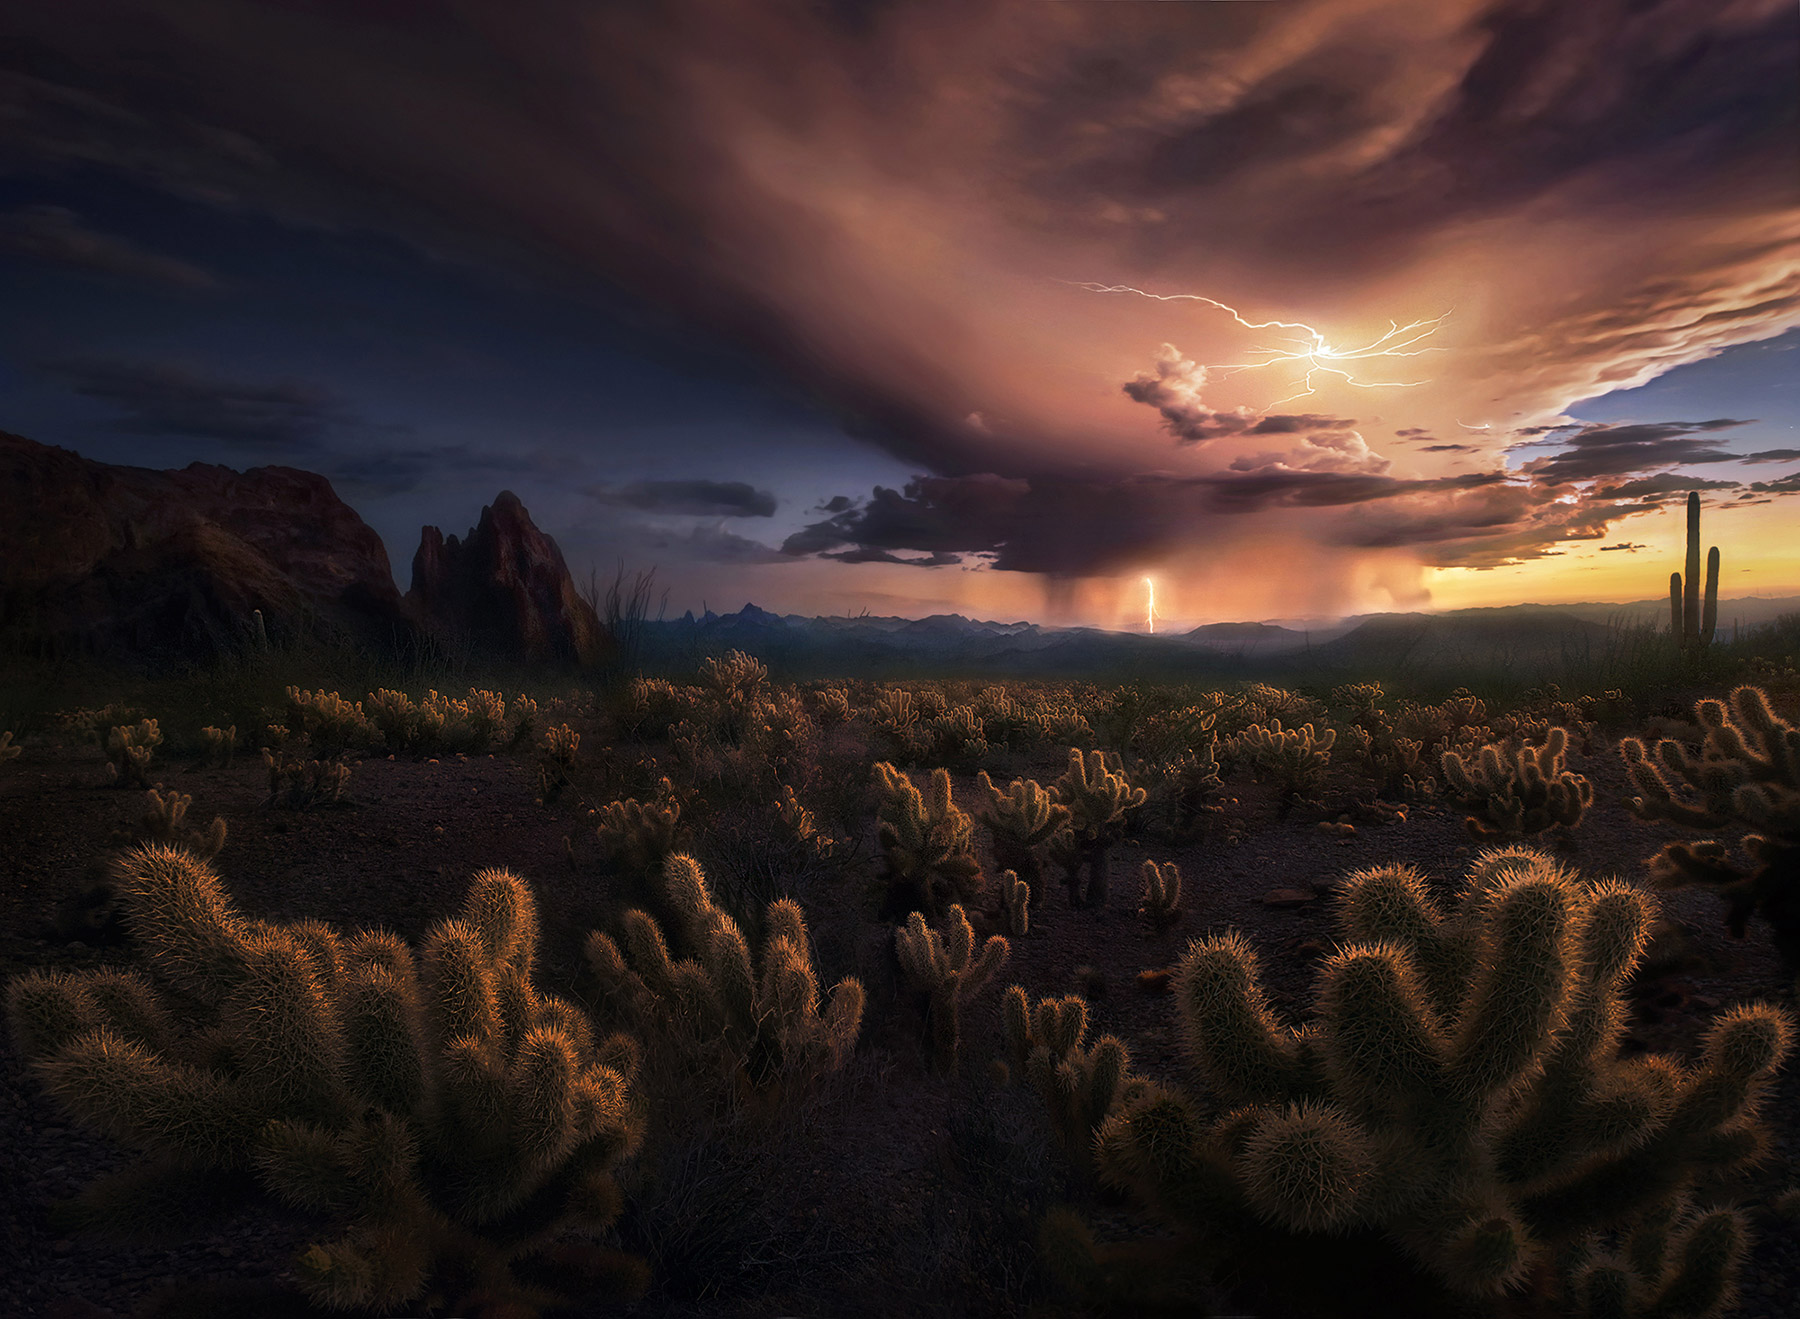 An amazing monsoonal storm cell I was lucky to catch at twilight over these glowing Cholla cactus.